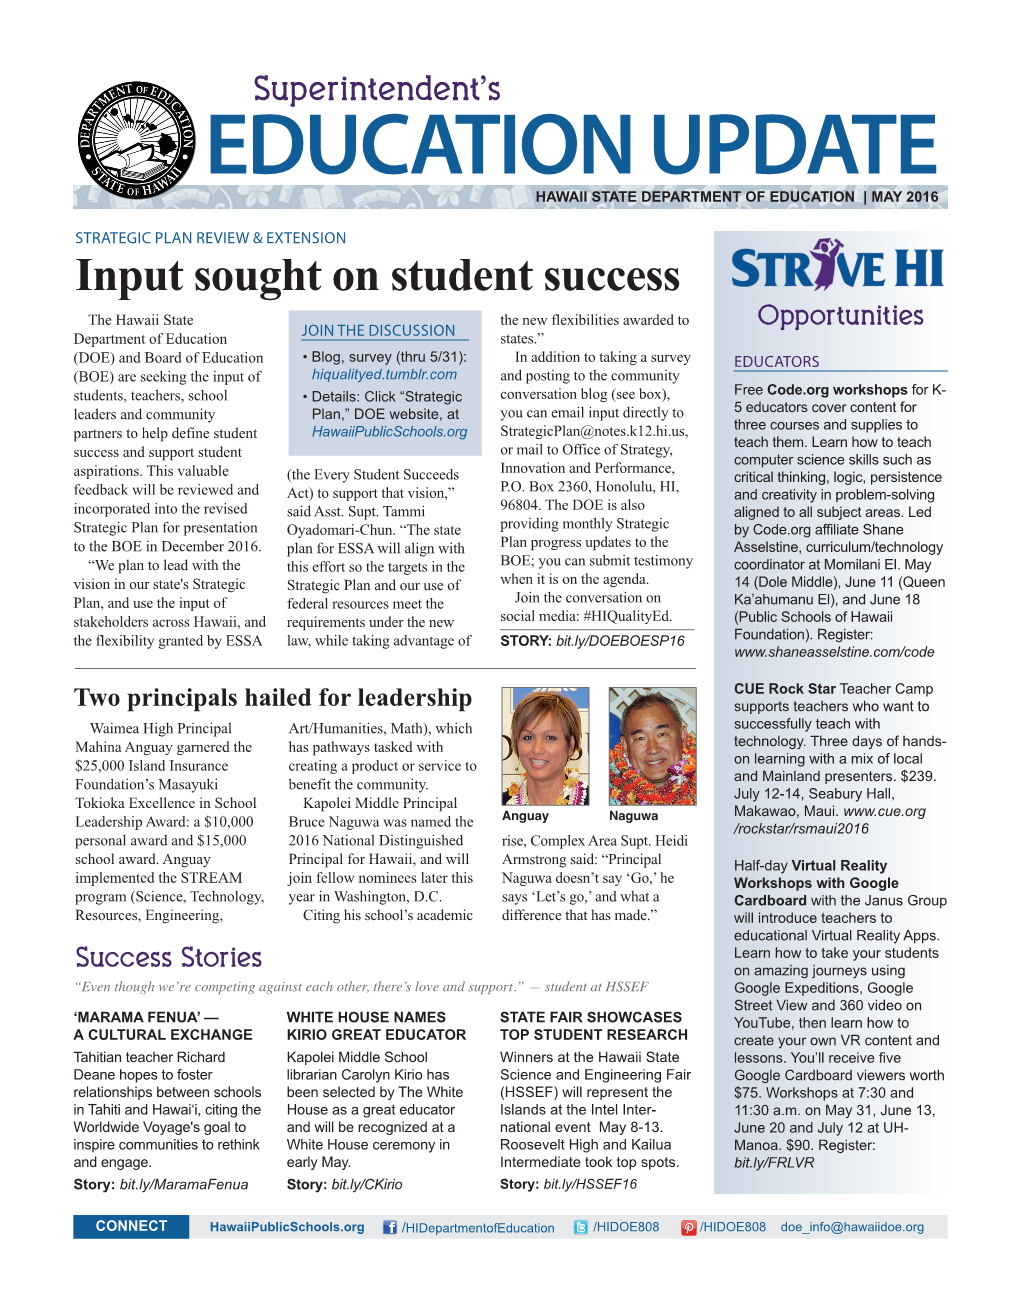 Education Update Hawaii State Department of Education | May 2016